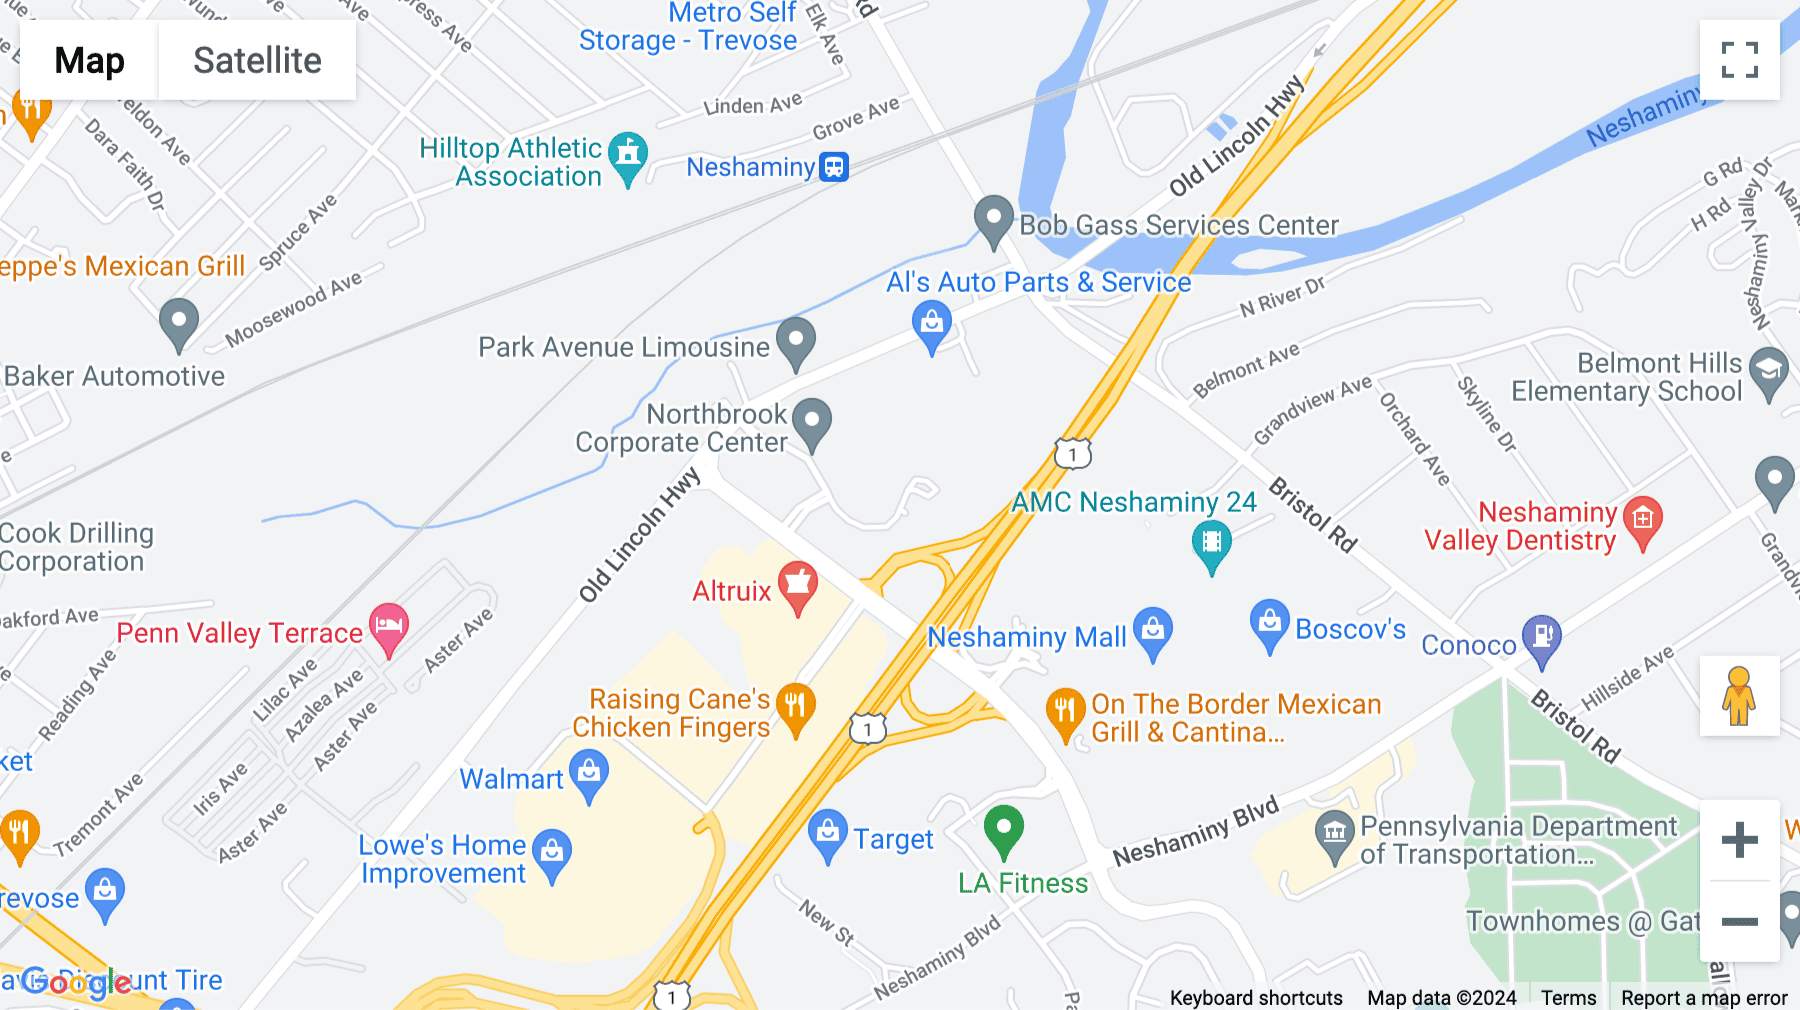 Click for interative map of Northbrook Corporate Center, 1000 Northbrook Drive, Suite 100, Feasterville-Trevose